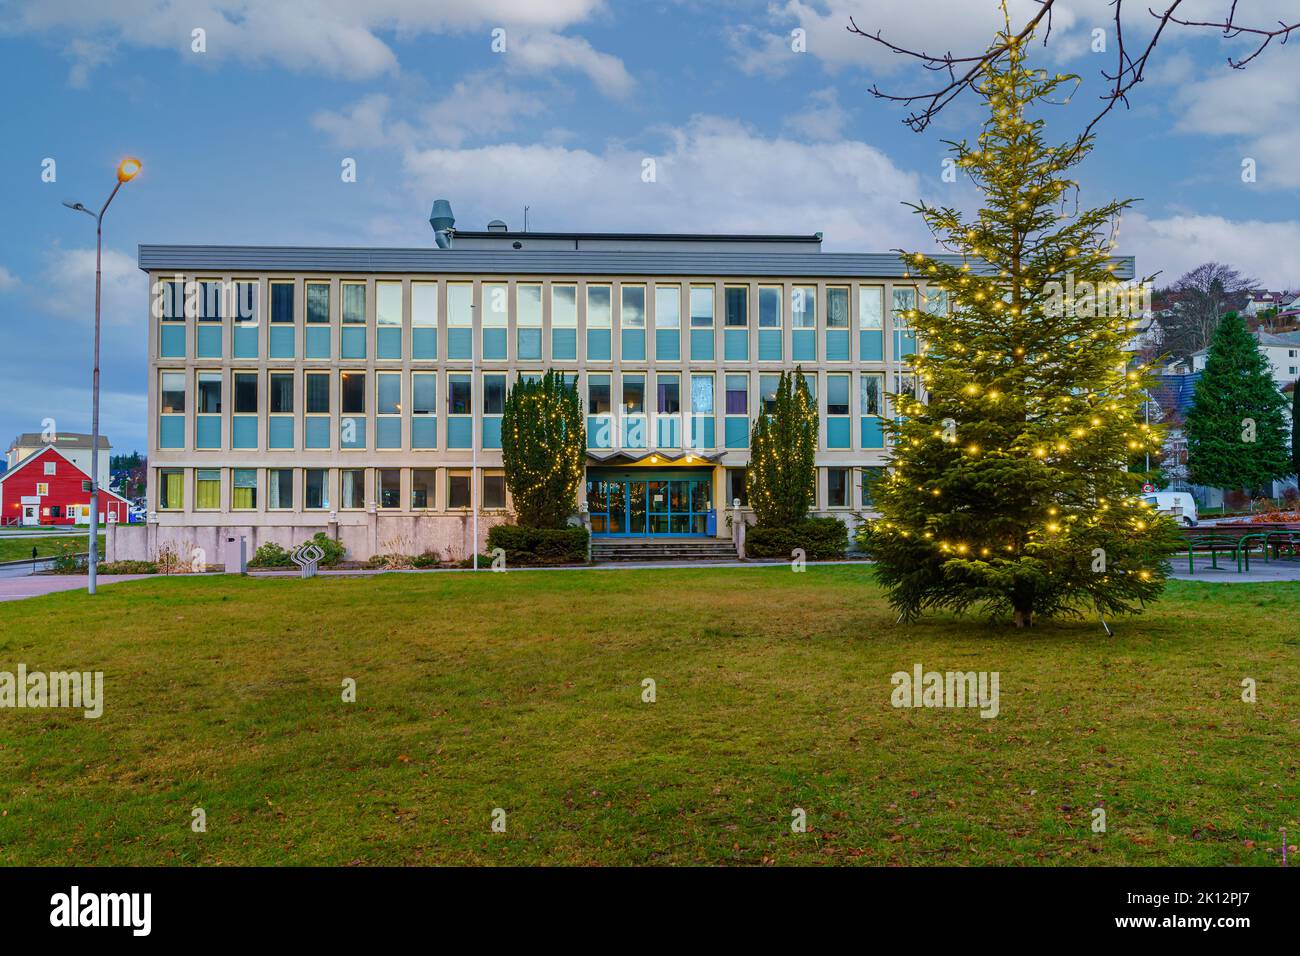 Ulsteinvik city hall with Christmas tree in front. Stock Photo